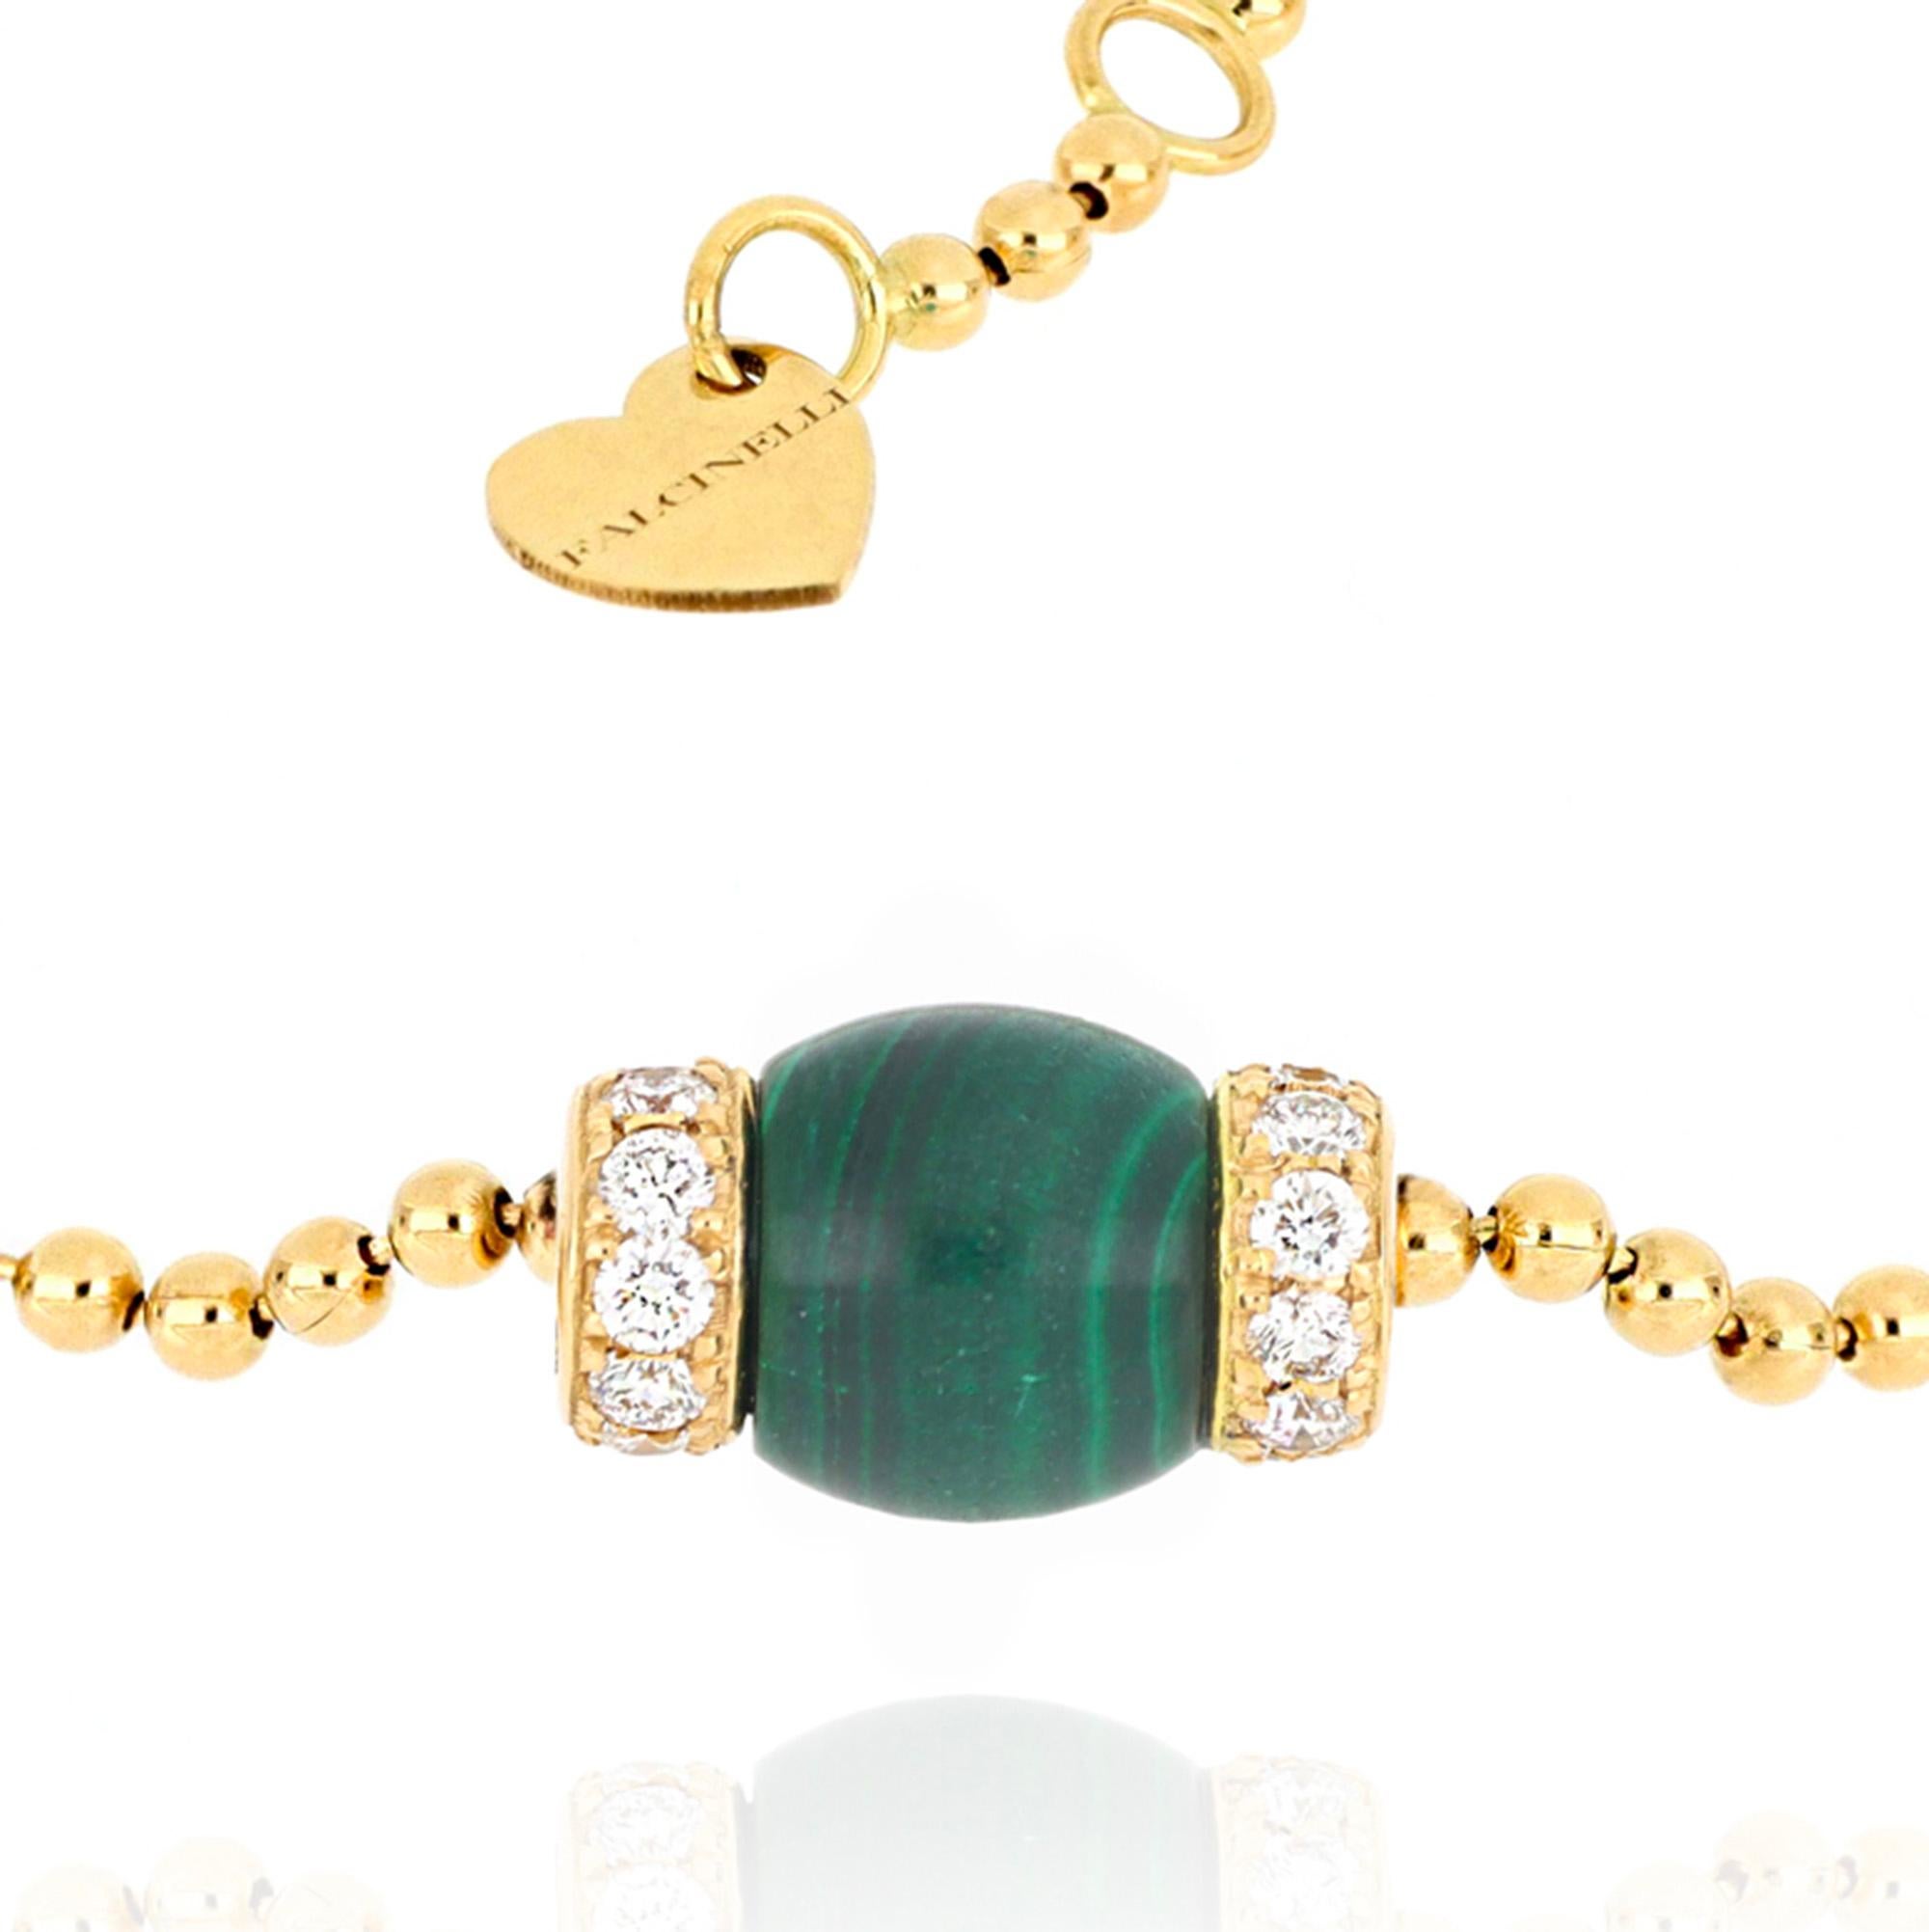 The 18 karat yellow gold ball chain, light and comfortable on the skin, reveals all the craftsmanship with which this bracelet from Le Carrousel collection was designed. The central barrel-shaped pendant is enhanced by the intense color of malachite